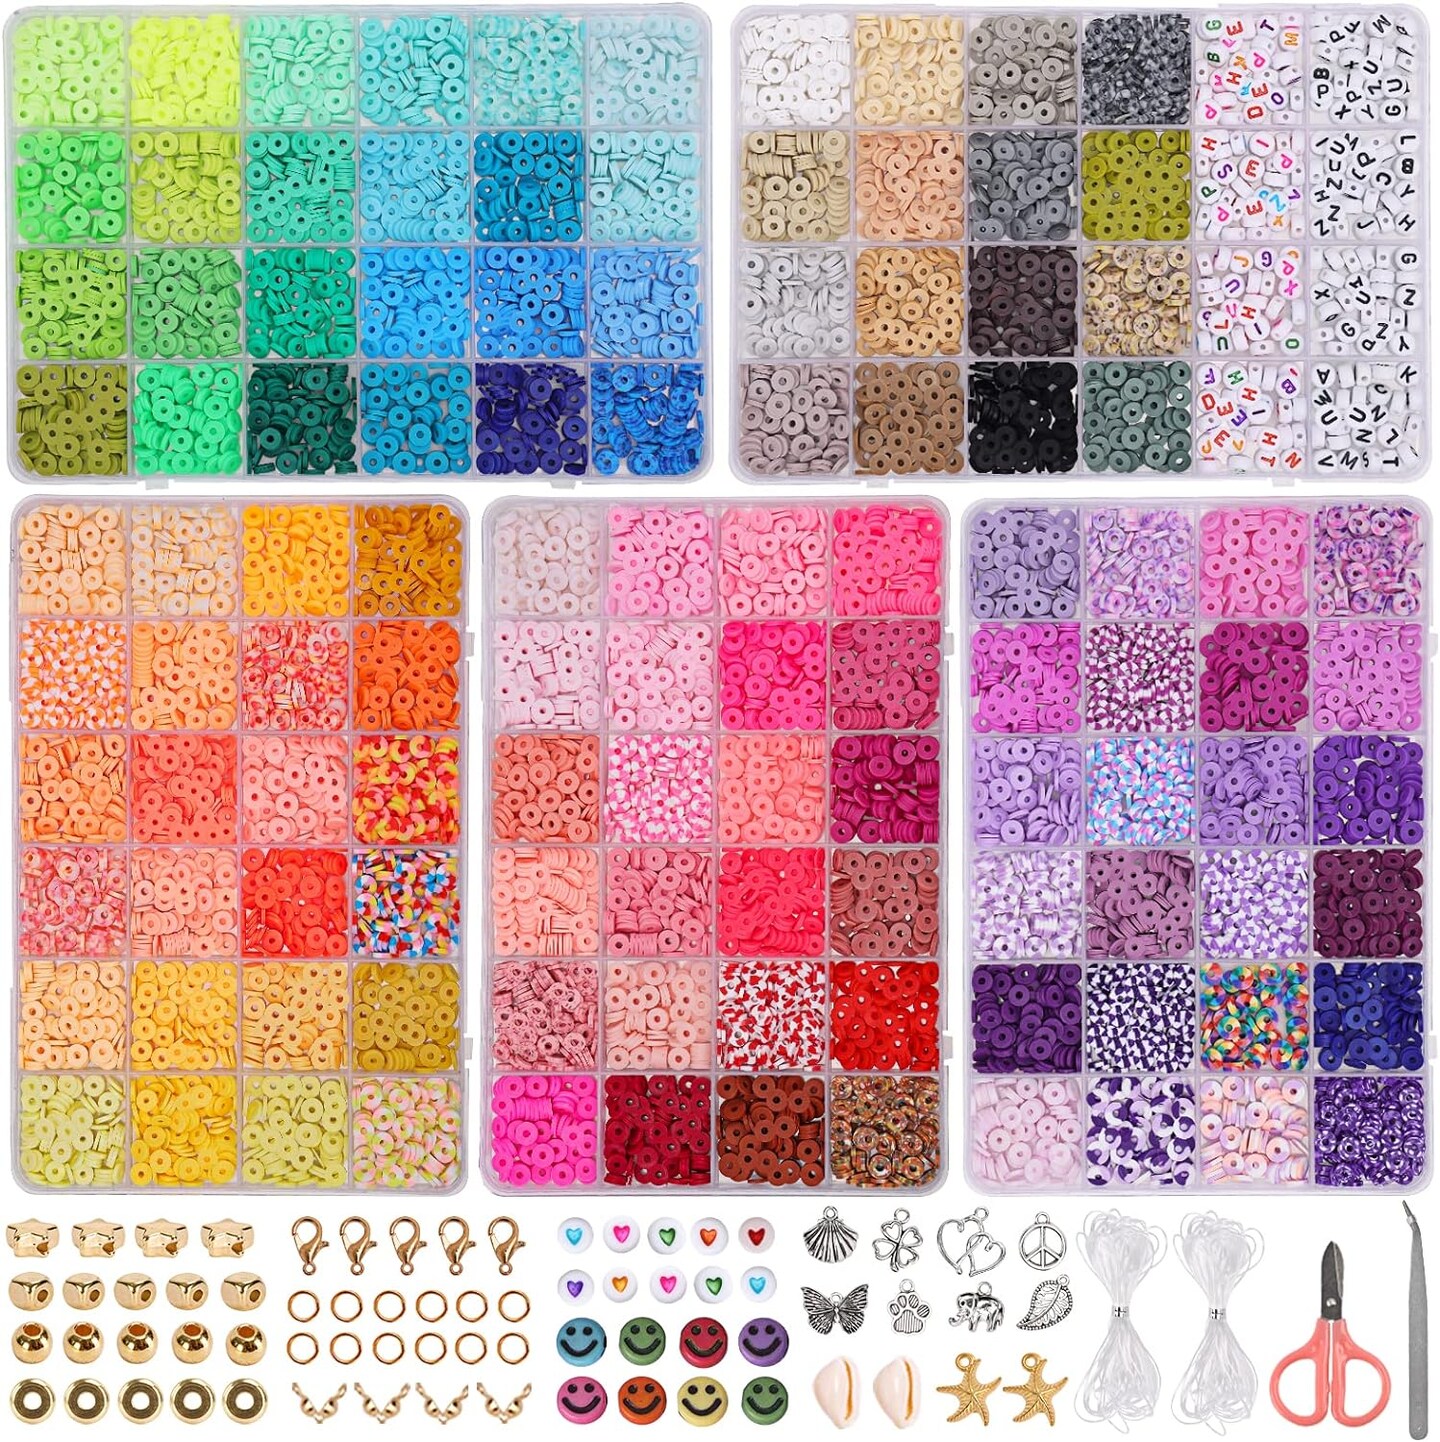 9470pcs Clay Beads Bracelet Making Kit, 112 Colors Polymer Beads Spacer Heishi Beads, Flat Preppy Beads for Jewelry Making Kit with Charms, DIY Crafts Gift